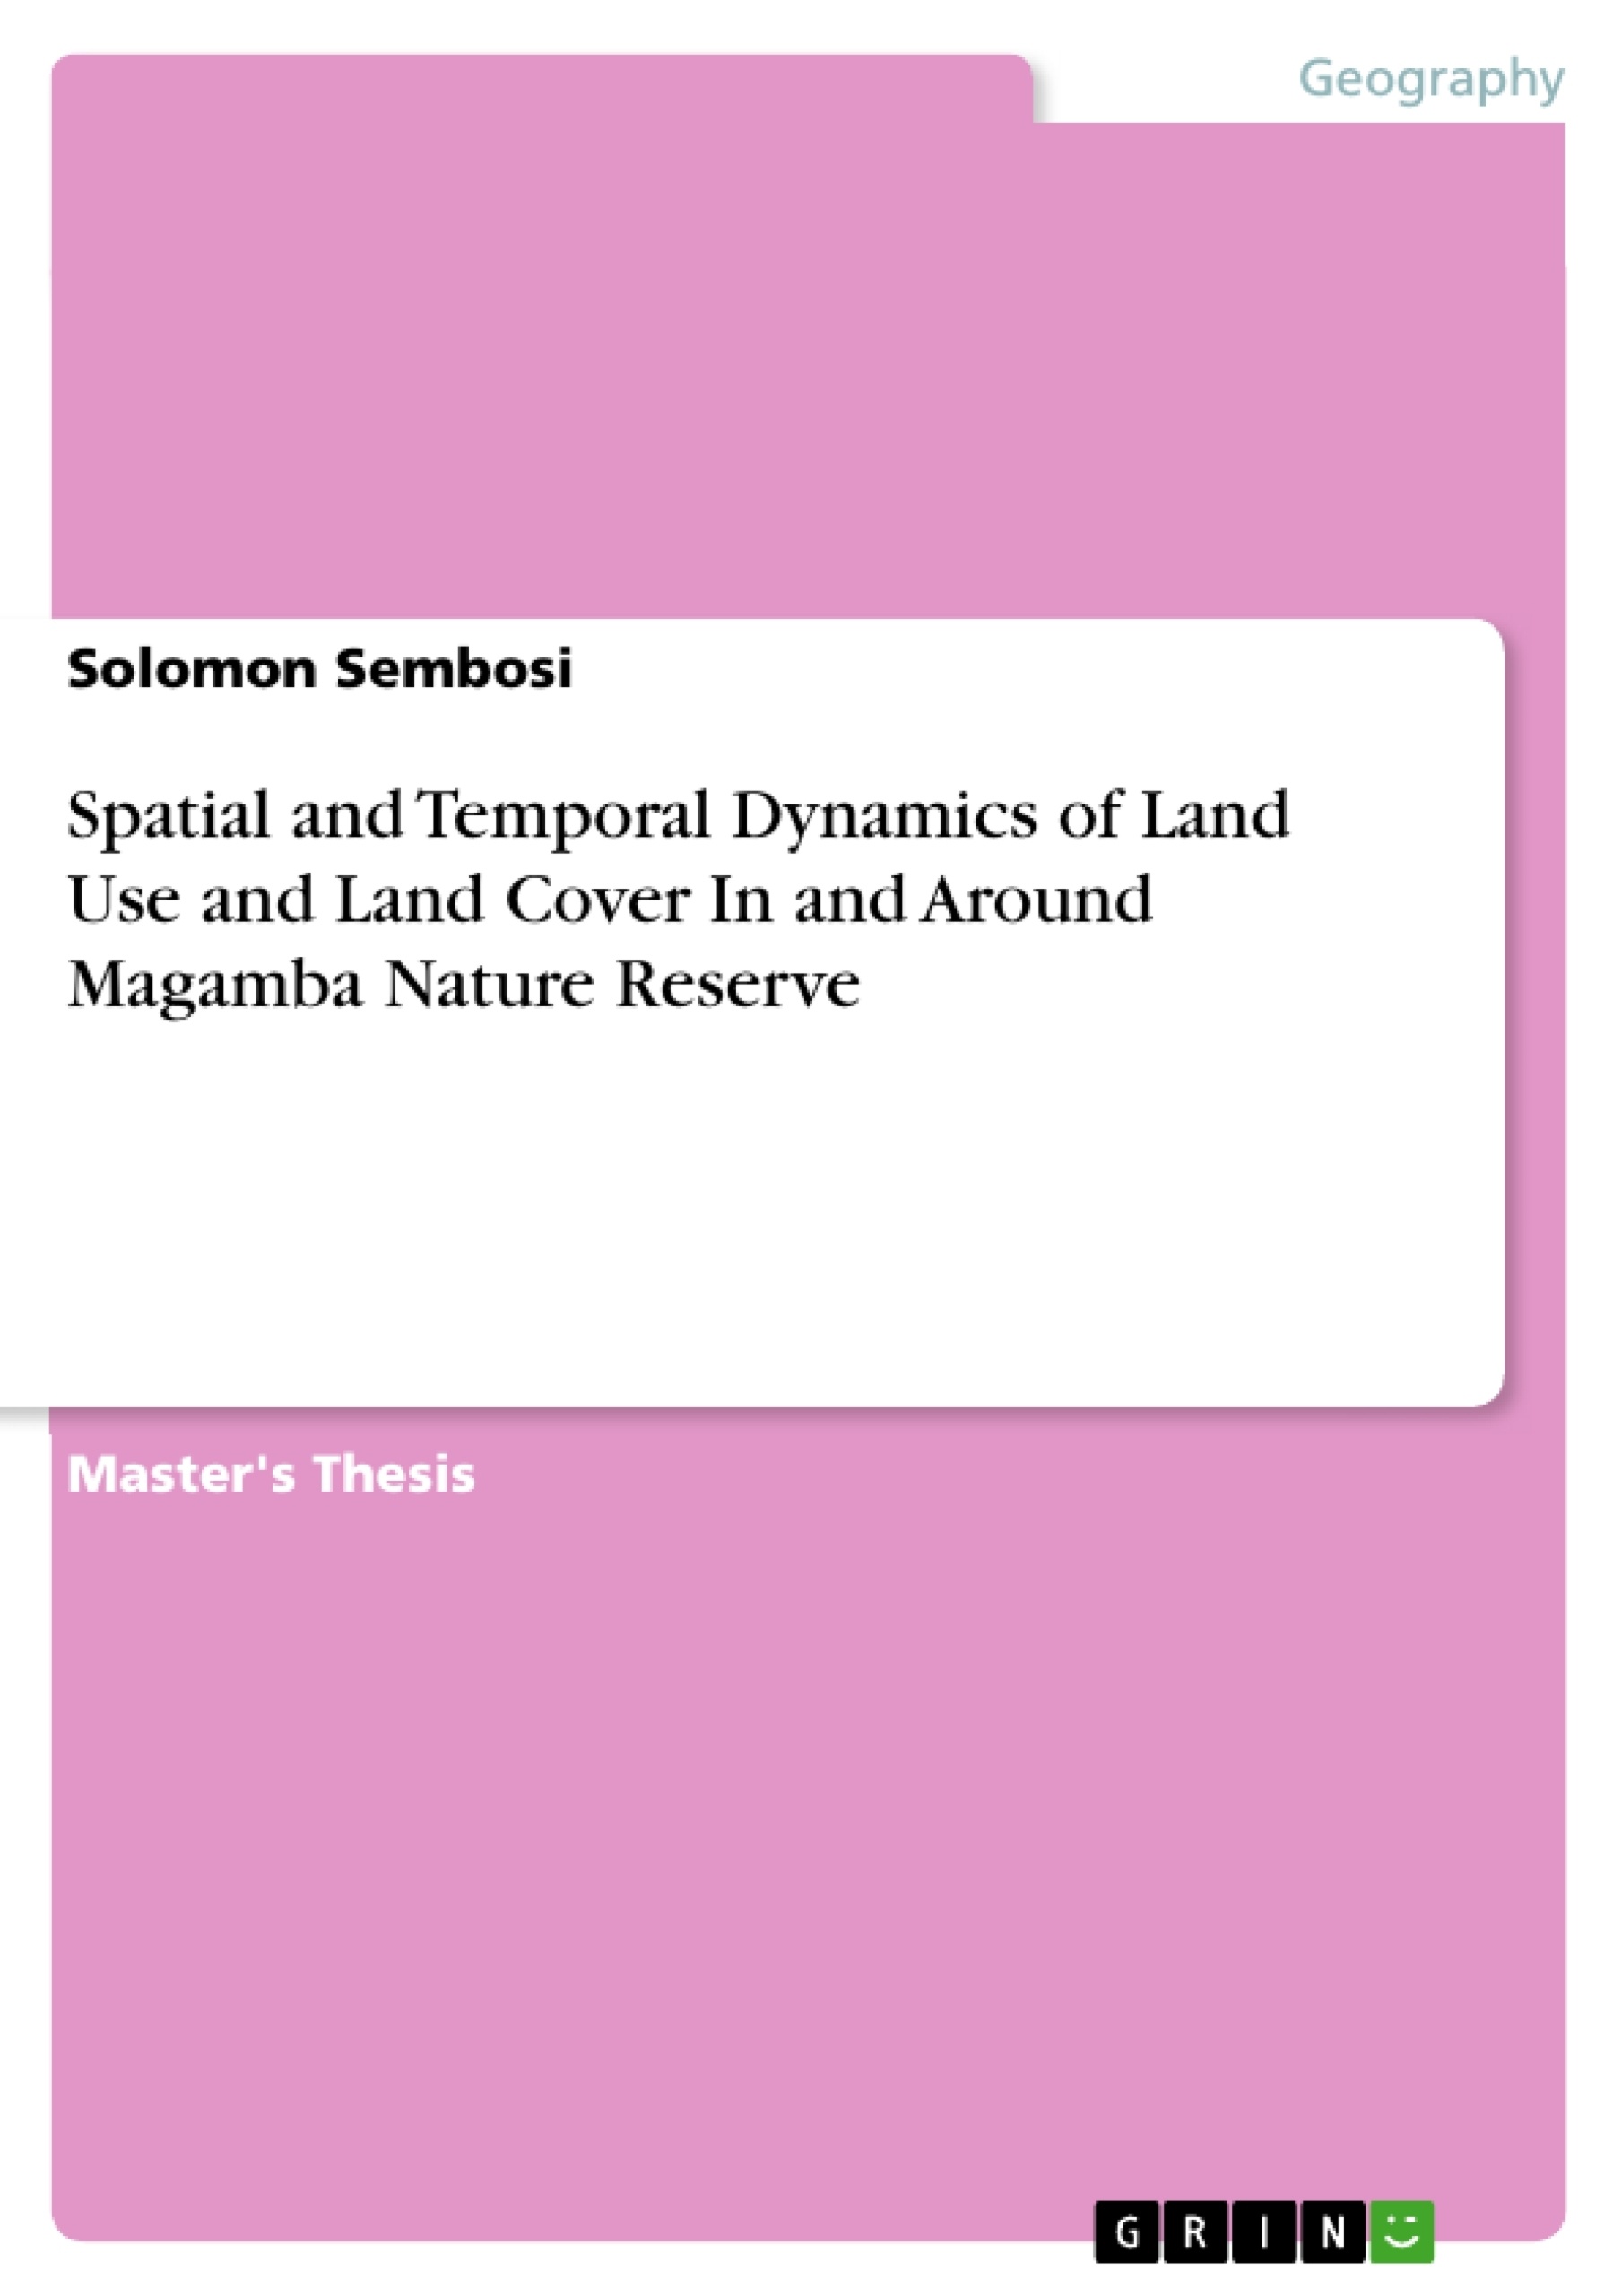 Title: Spatial and Temporal Dynamics of Land Use and Land Cover In and Around Magamba Nature Reserve